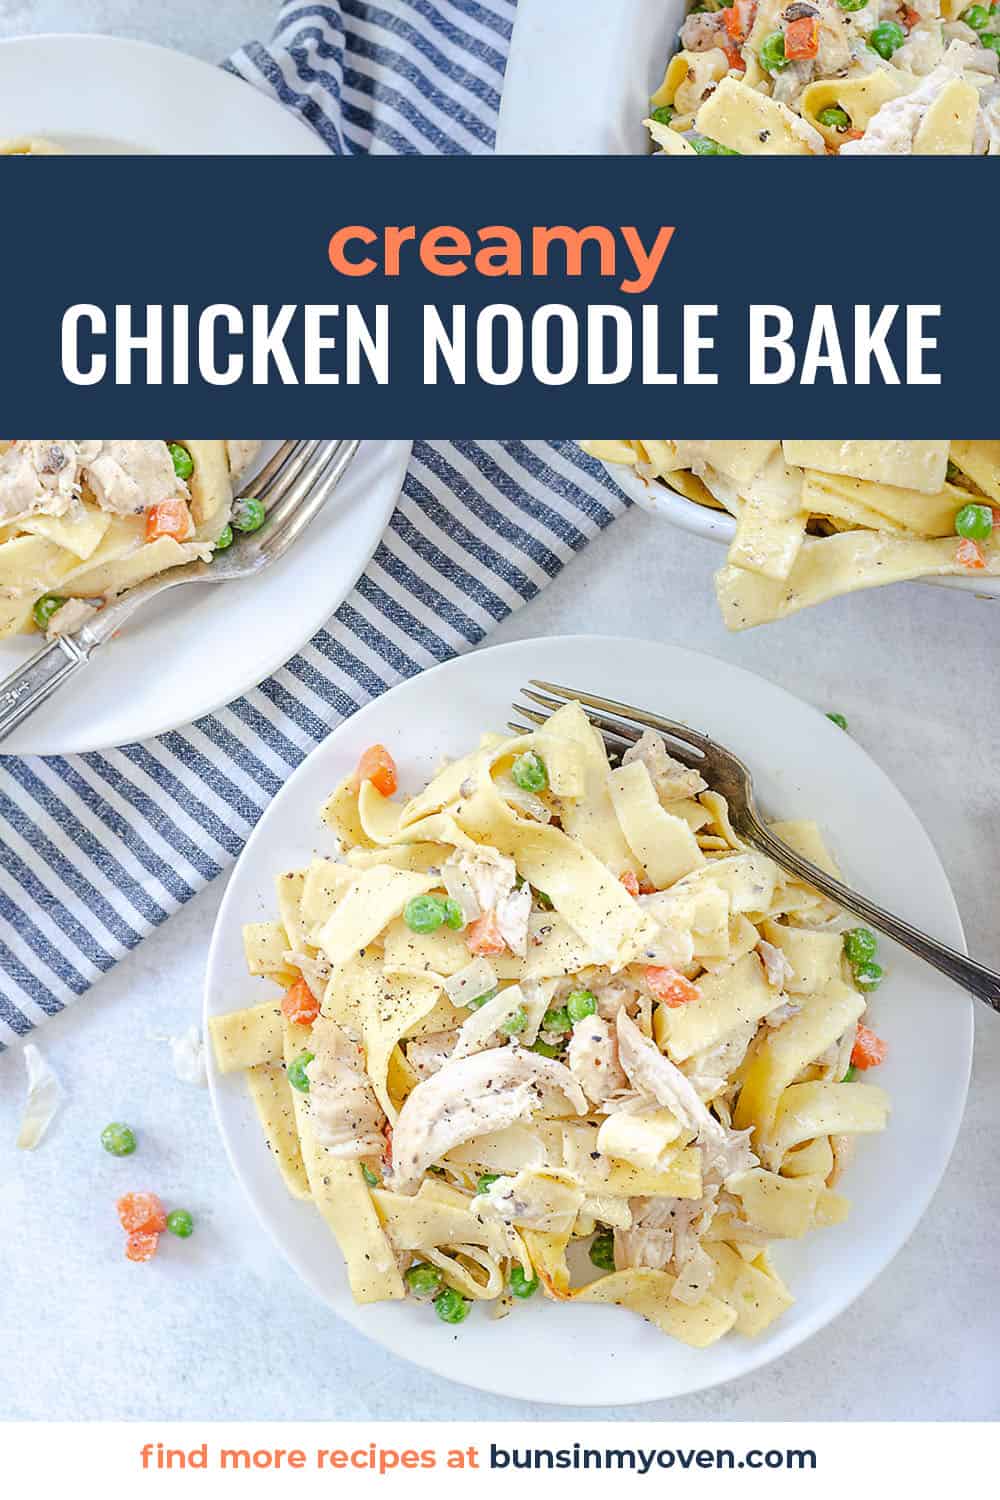 creamy chicken noodle casserole recipe on white plate with text for Pinterest.